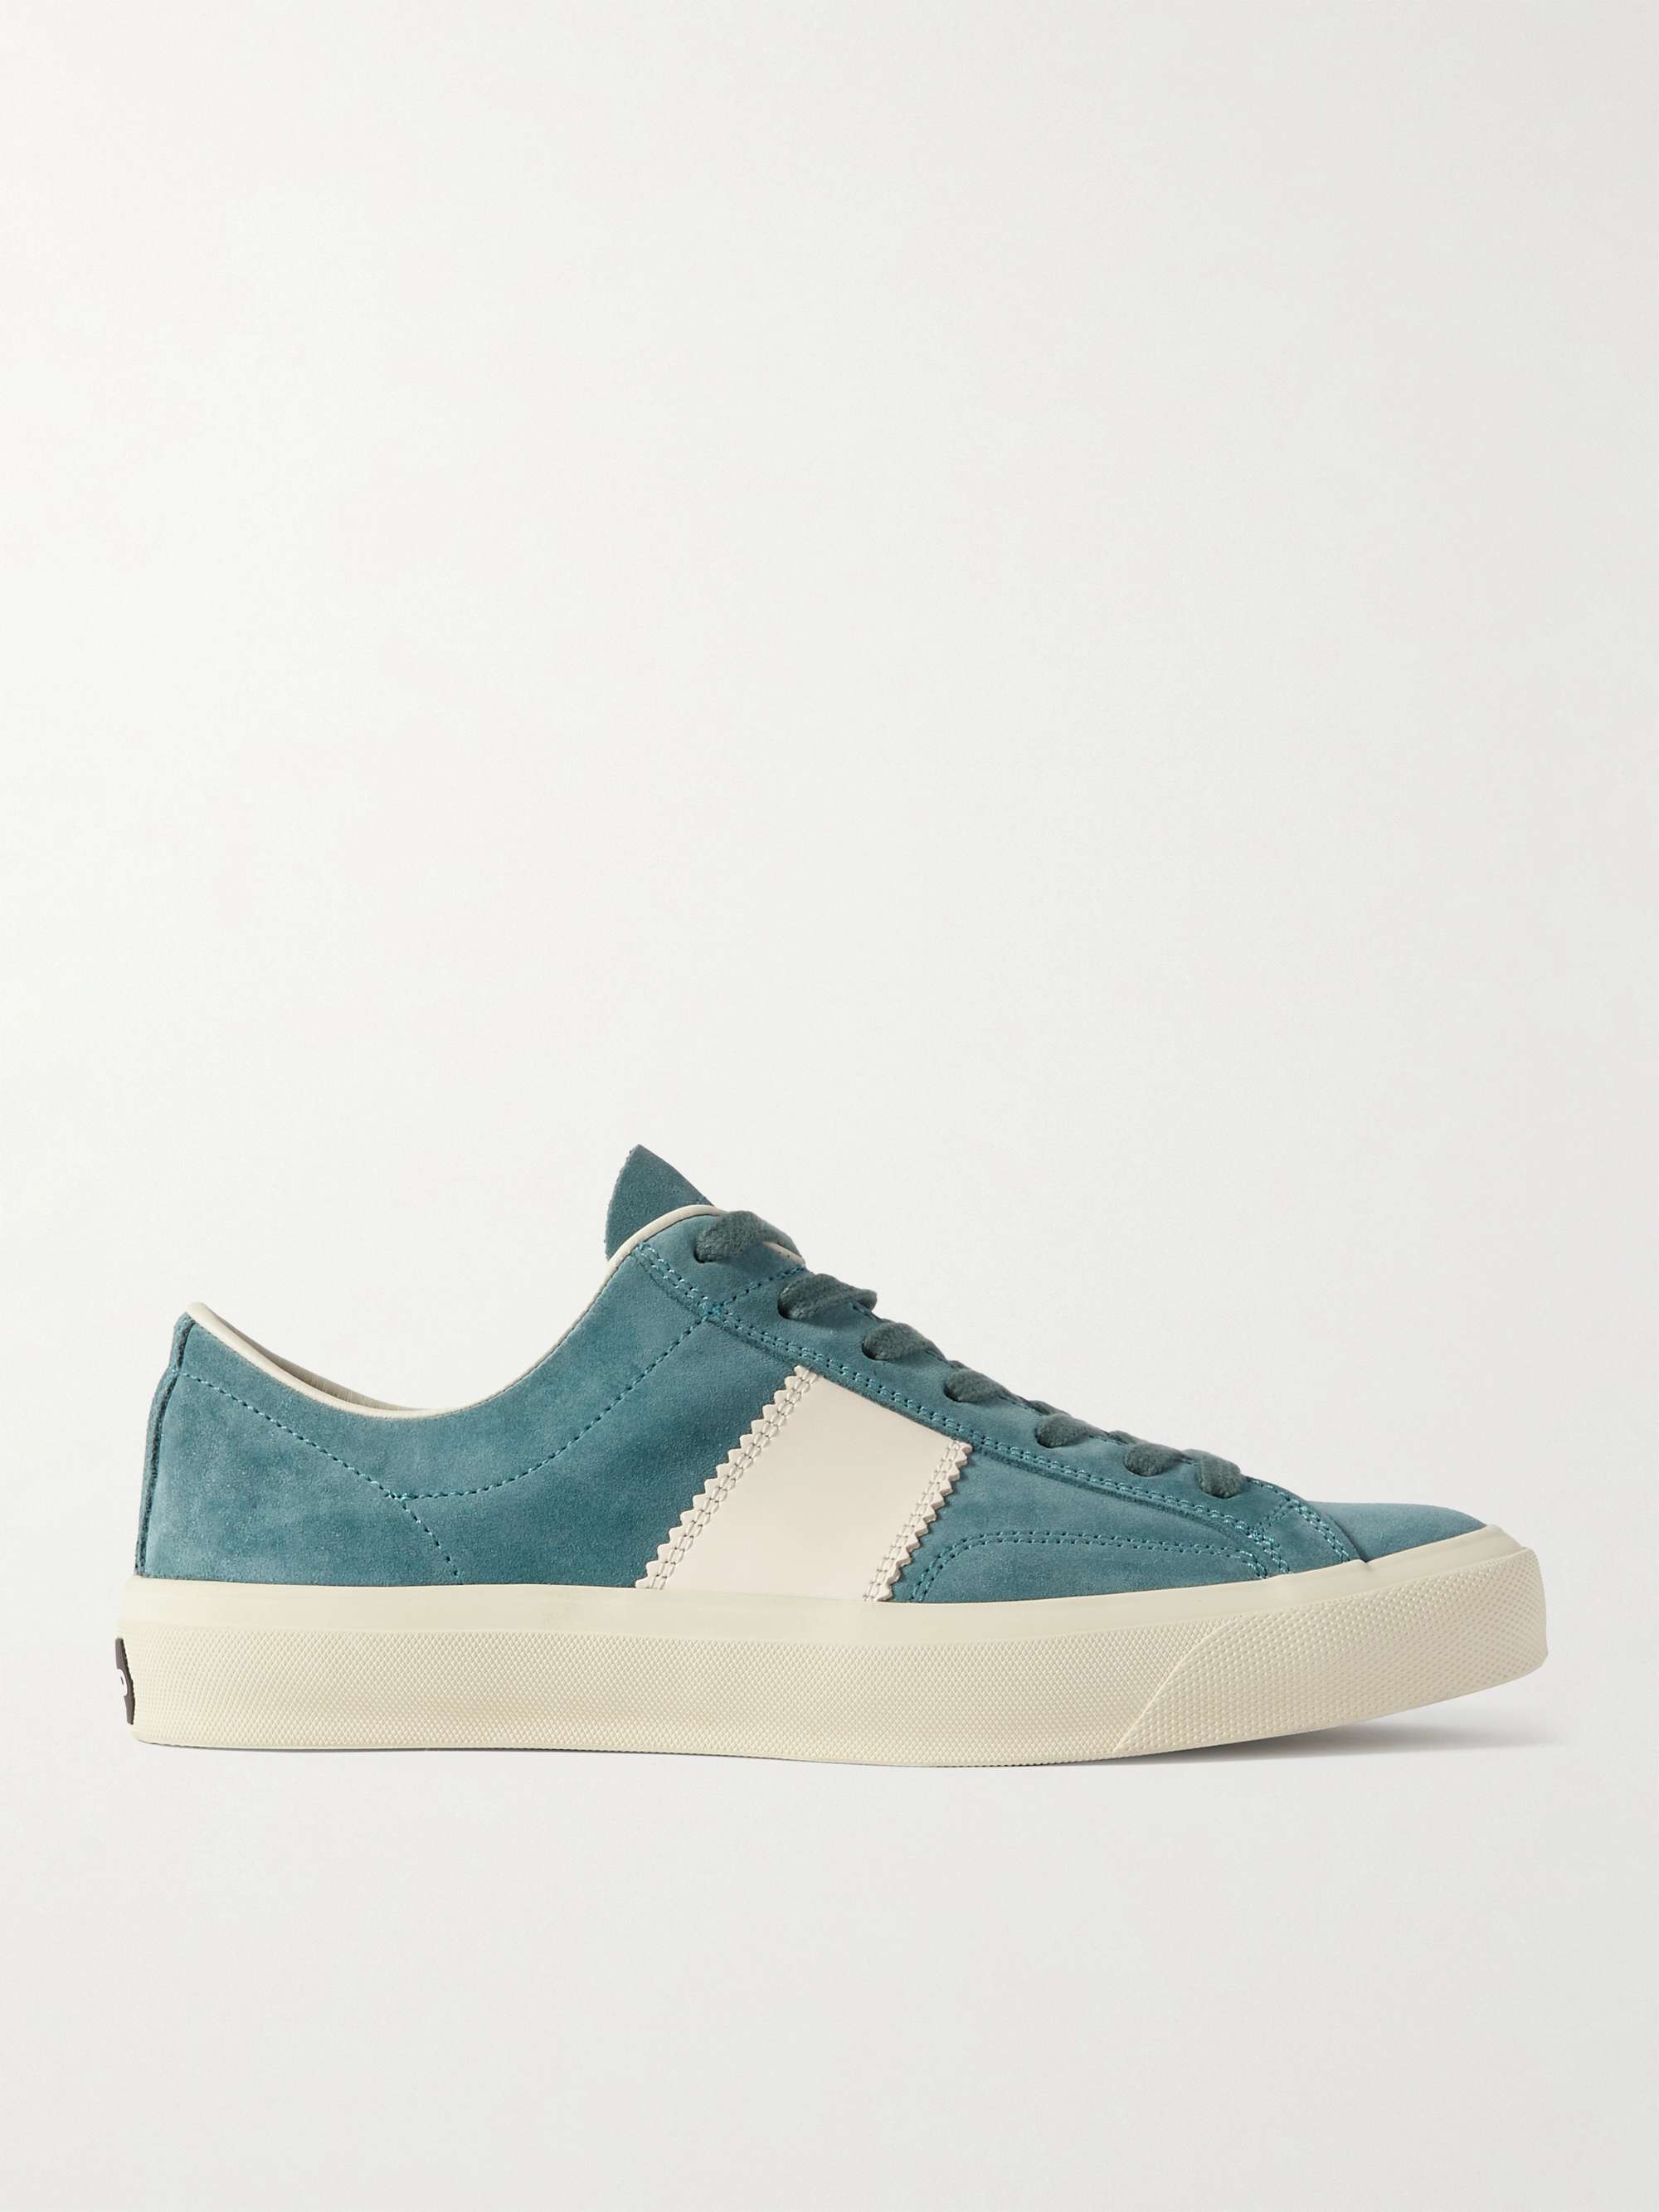 TOM FORD Cambridge Leather-Trimmed Suede Sneakers for Men | MR PORTER